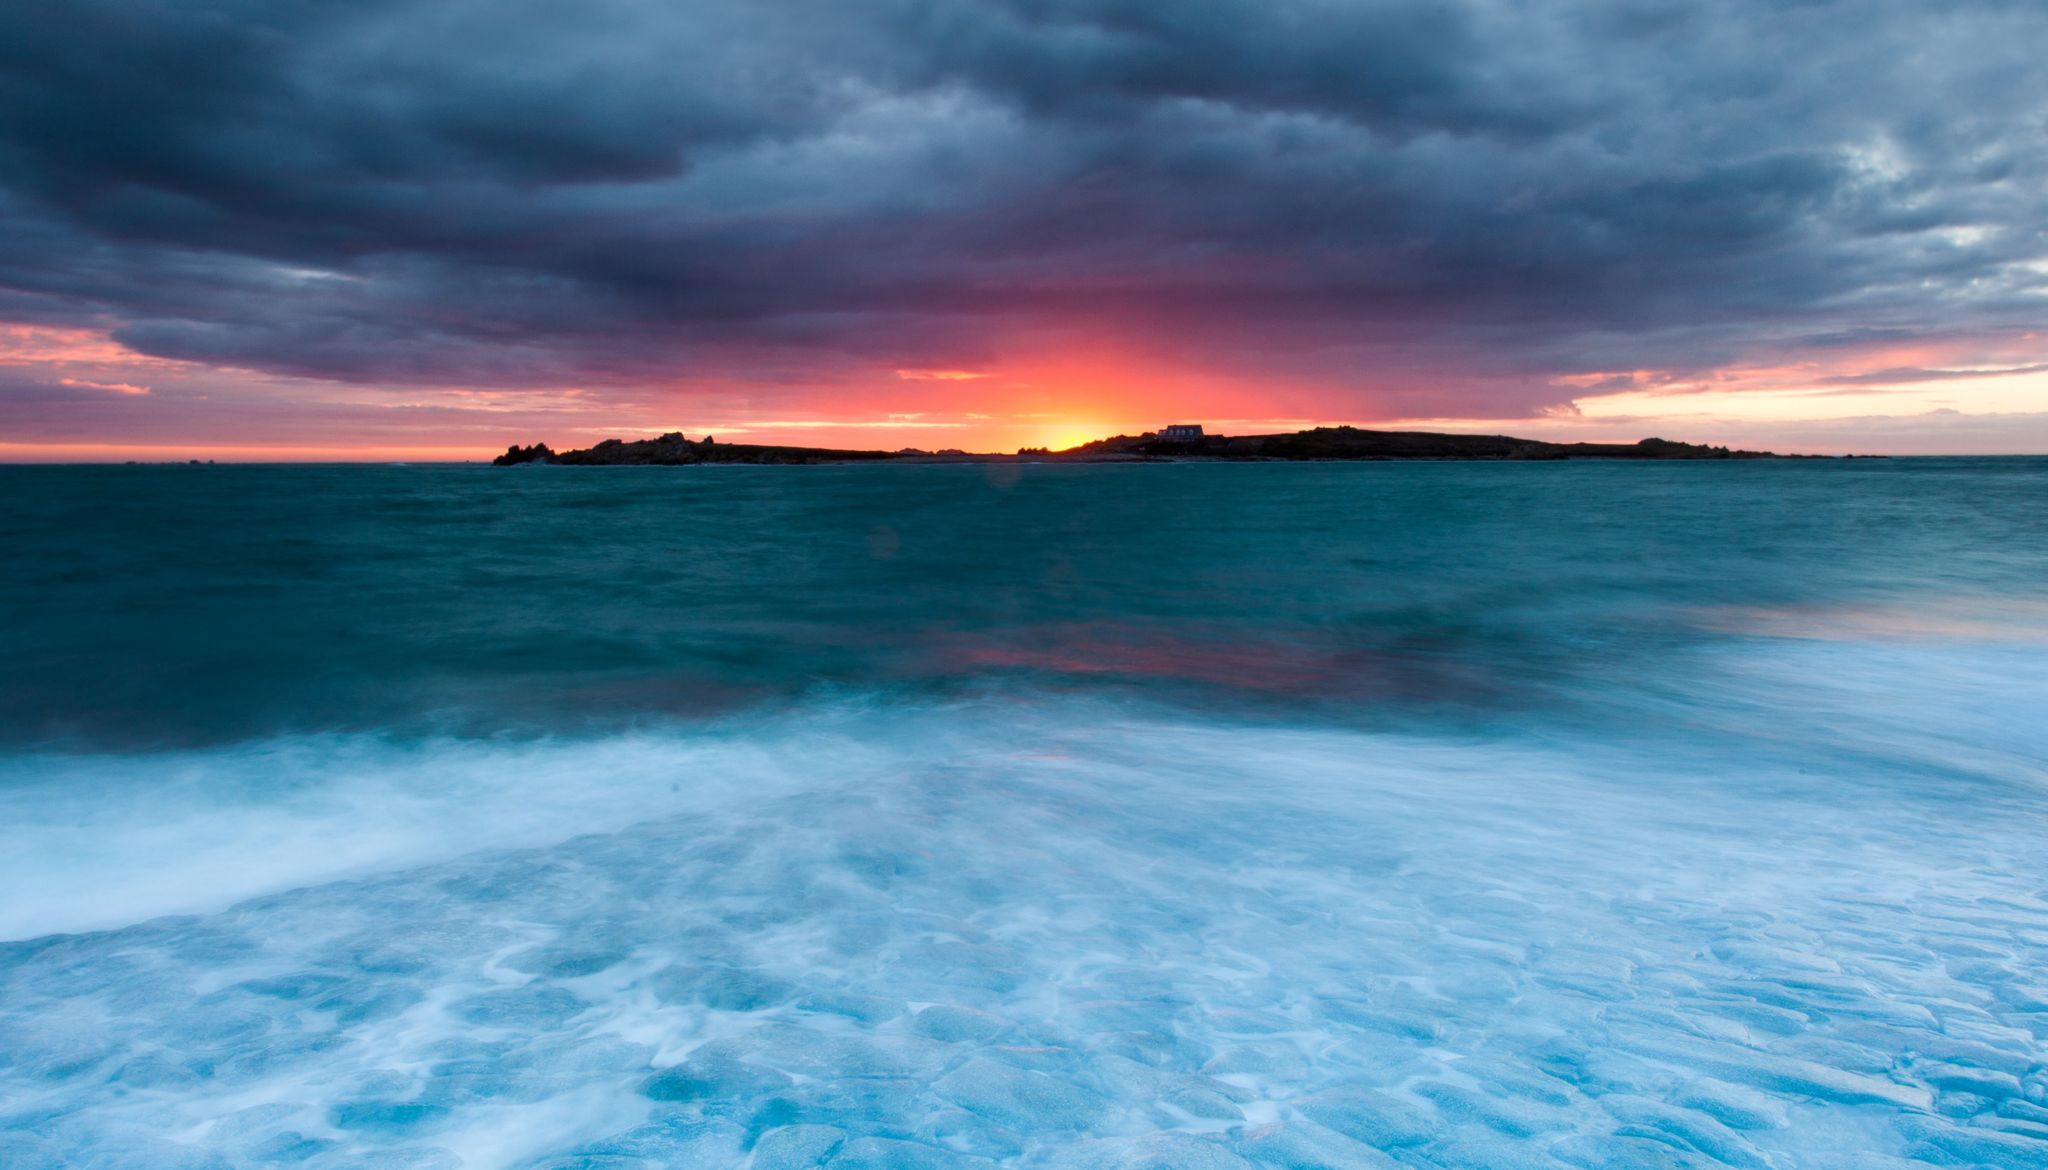 Sunset at Lihou Island in Guernsey